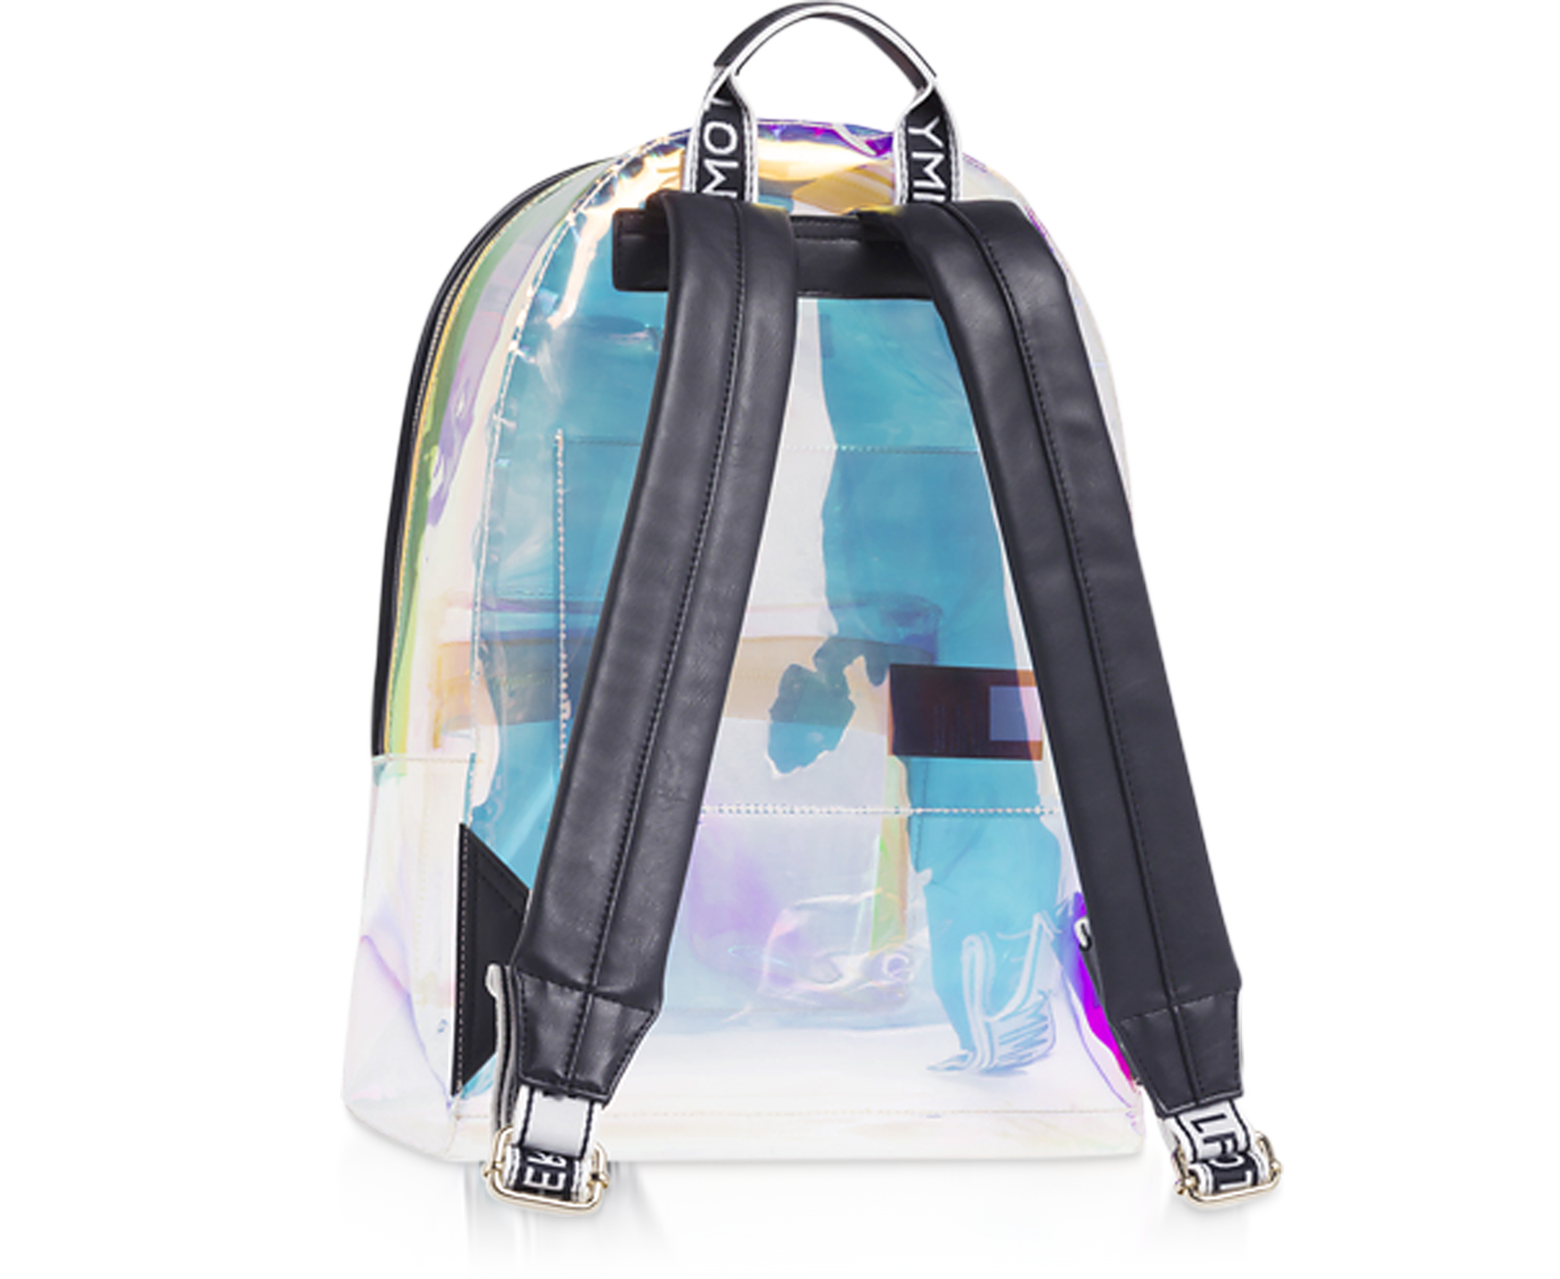 Tommy Hilfiger Iridescent Iconic Tommy 